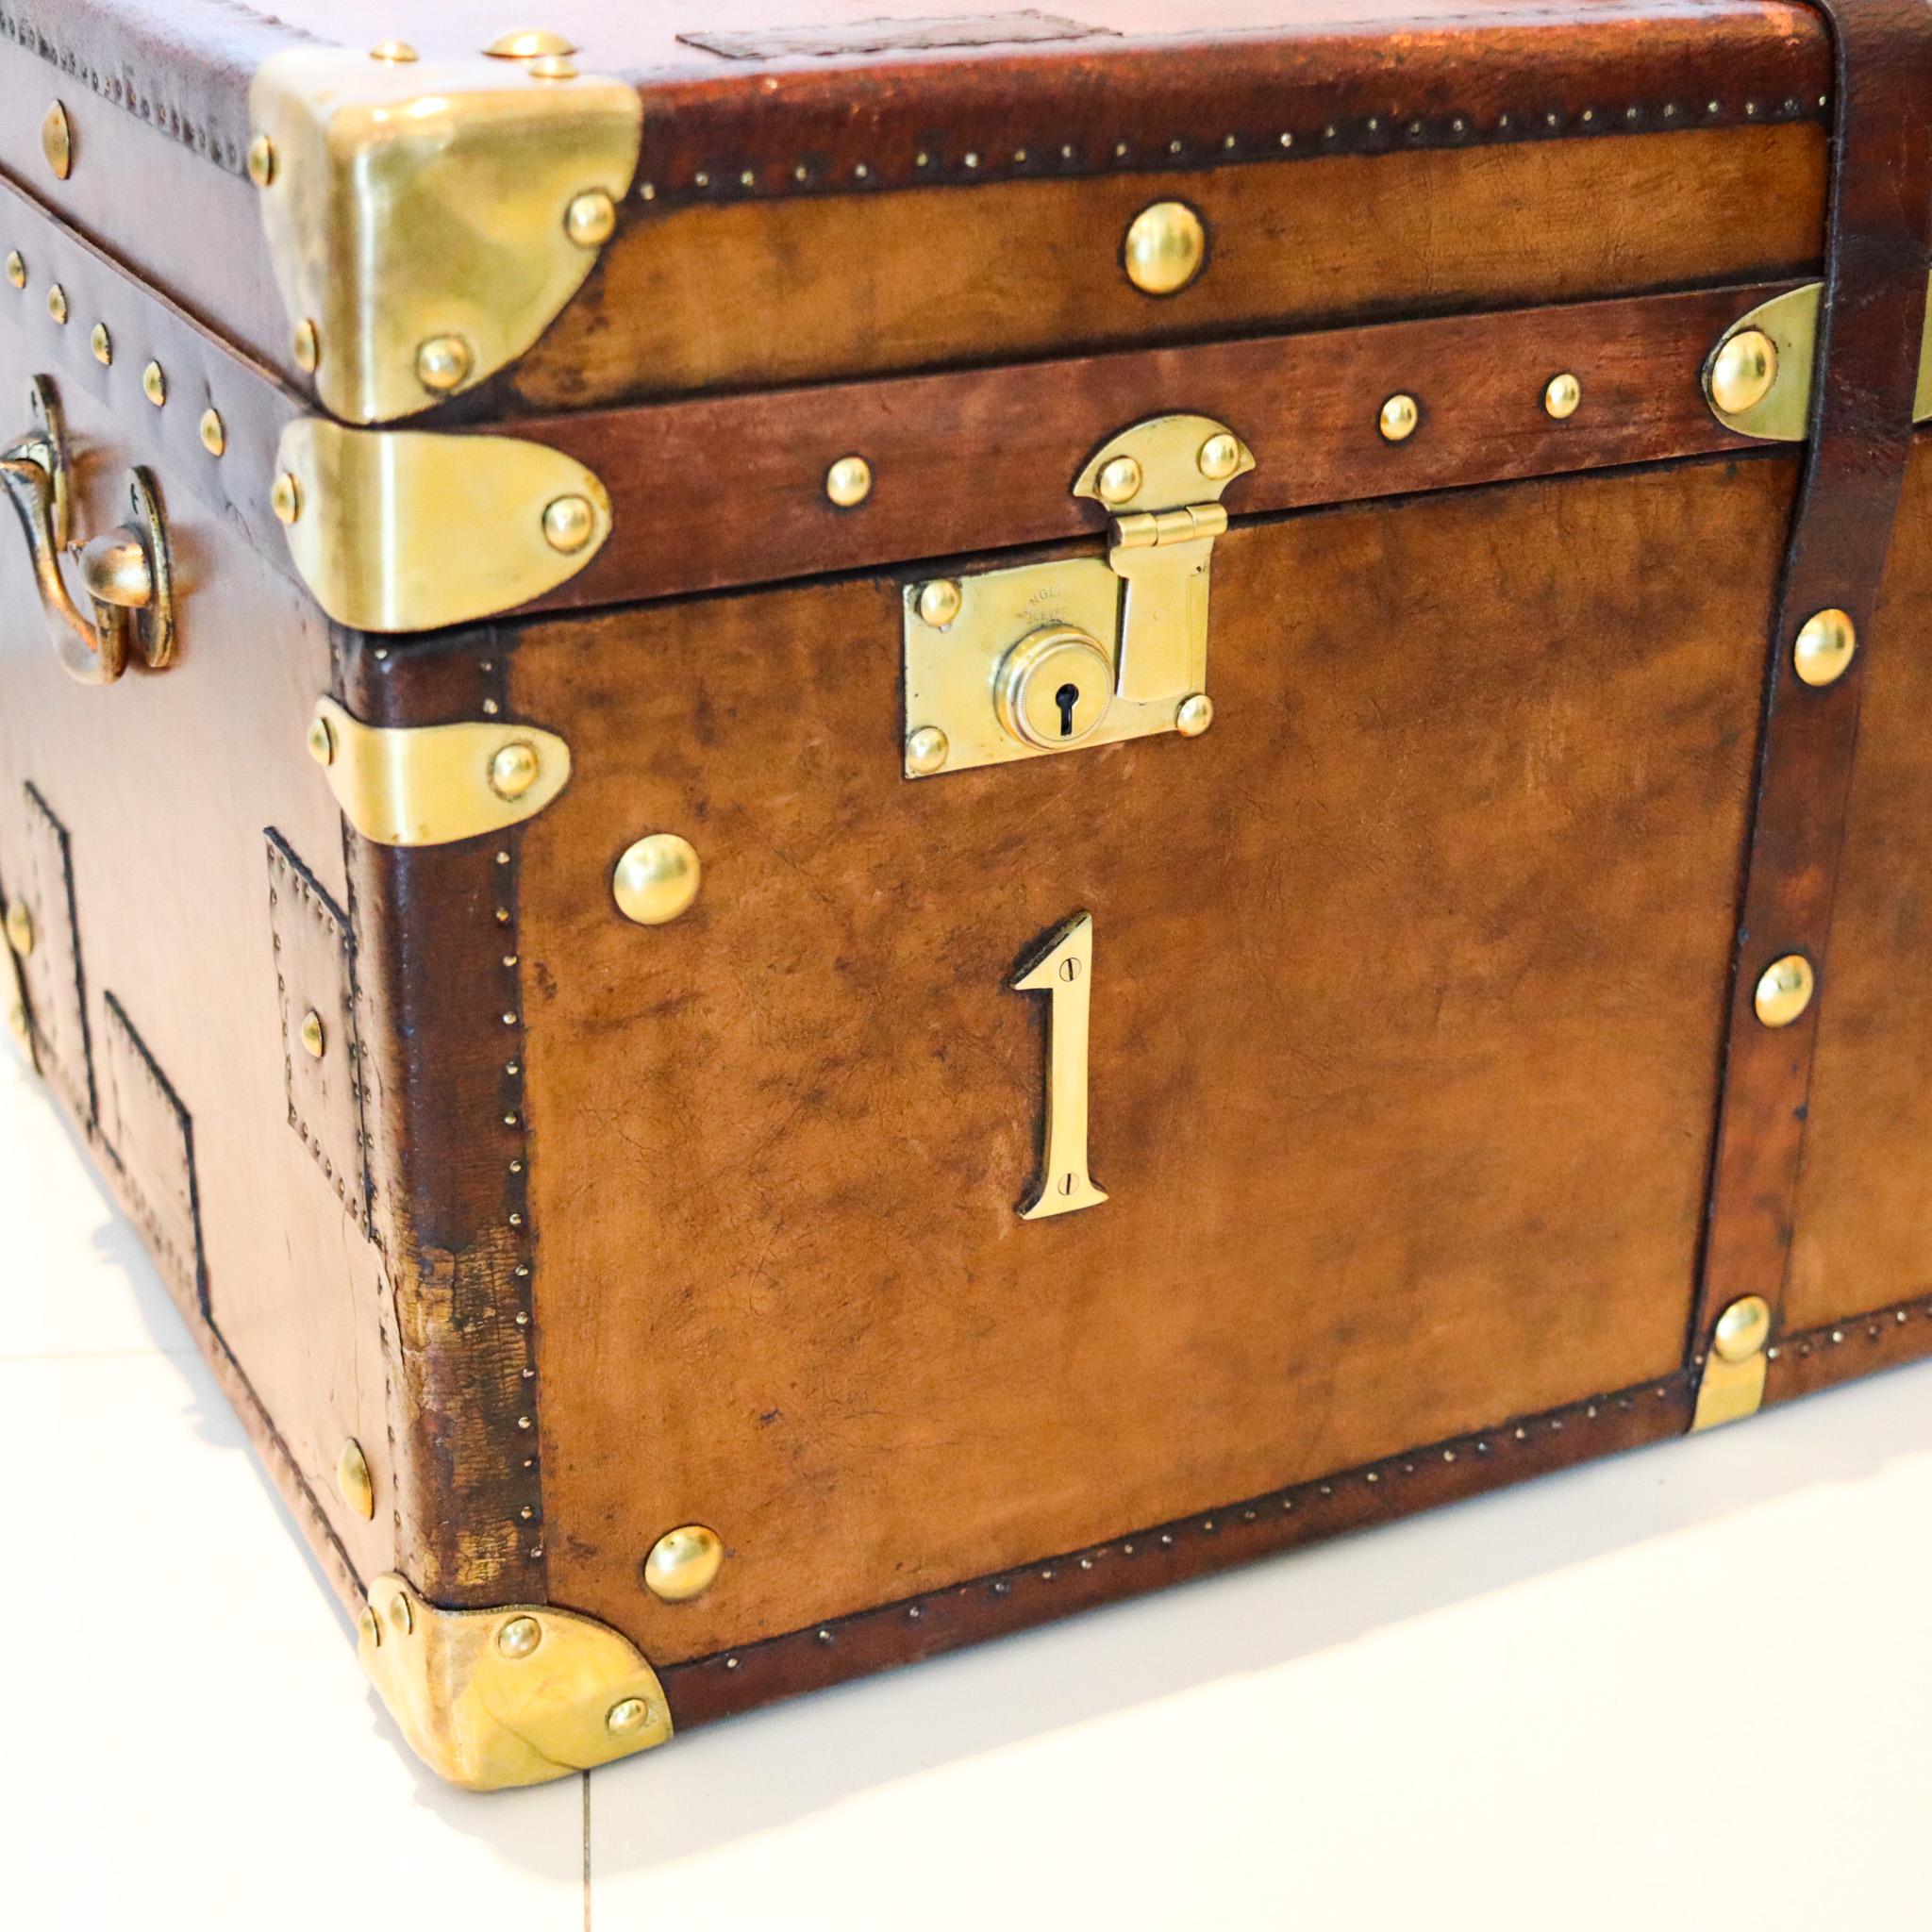 A British military officer chest.

Exceptional rectangular British military officer's travel trunk chest, superbly rebuilt and refurbished in beautifully patinated antique leather with accents in solid brass and fitted with two hinged handles. The